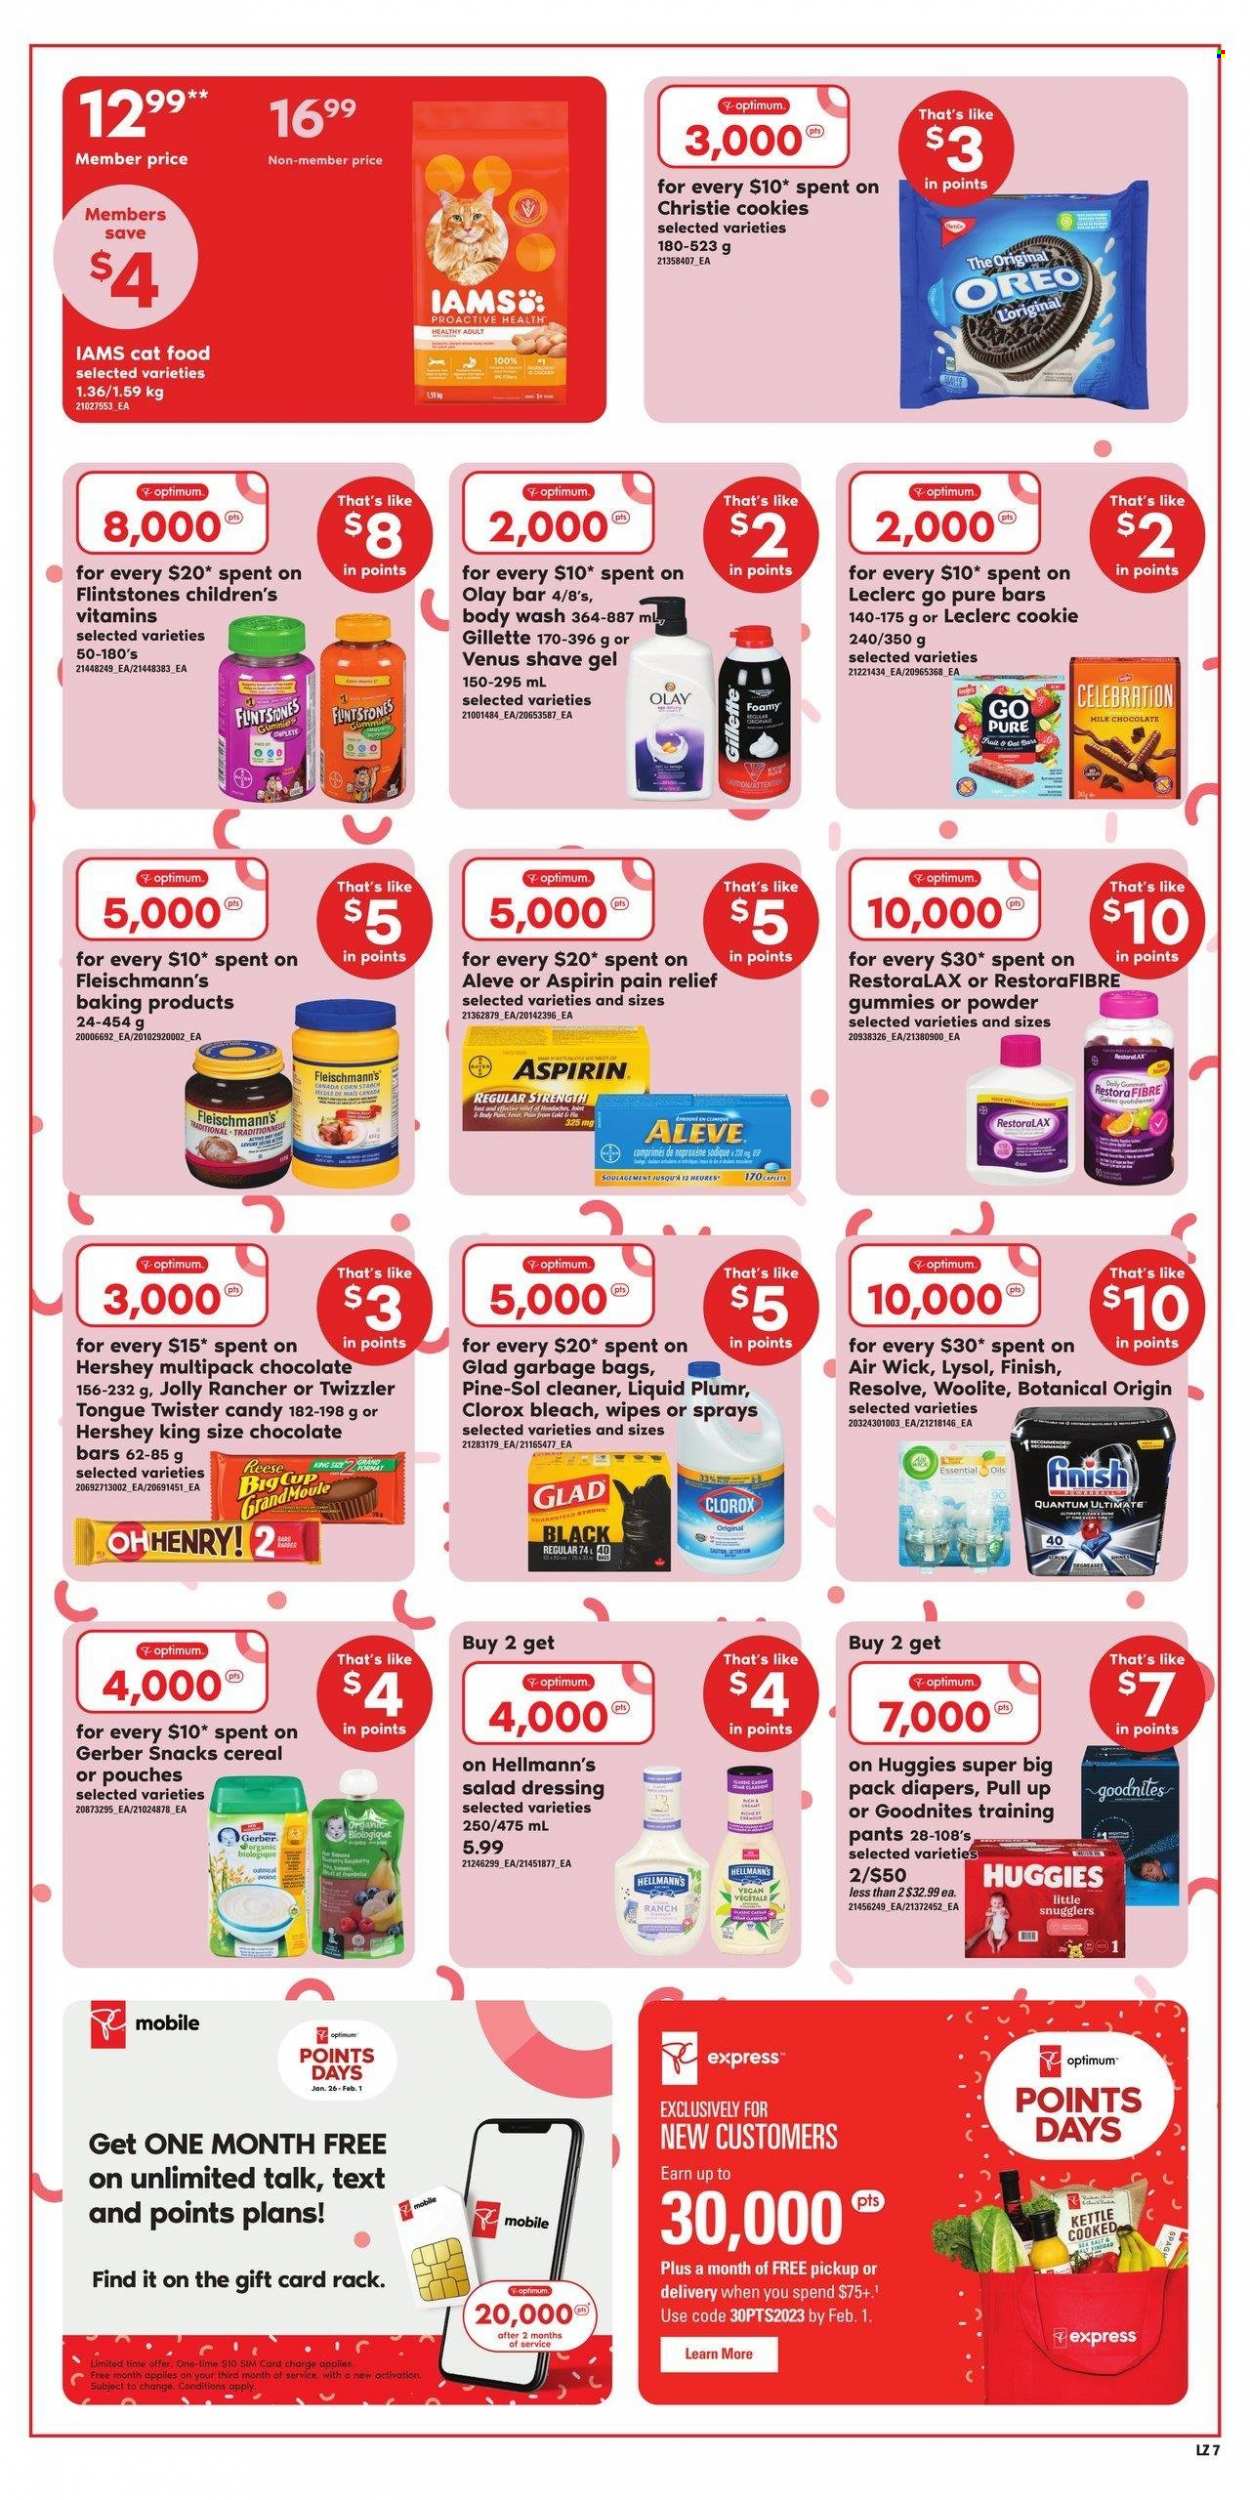 thumbnail - Loblaws Flyer - January 26, 2023 - February 01, 2023 - Sales products - Hellmann’s, cookies, snack, Celebration, chocolate bar, Gerber, cereals, salad dressing, dressing, wipes, pants, nappies, cleaner, bleach, Lysol, Clorox, Woolite, Pine-Sol, body wash, Gillette, Olay, shave gel, Venus, bag, Air Wick, essential oils, animal food, cat food, Optimum, Iams, pain relief, Aleve, aspirin, Huggies, Oreo, Twister. Page 8.